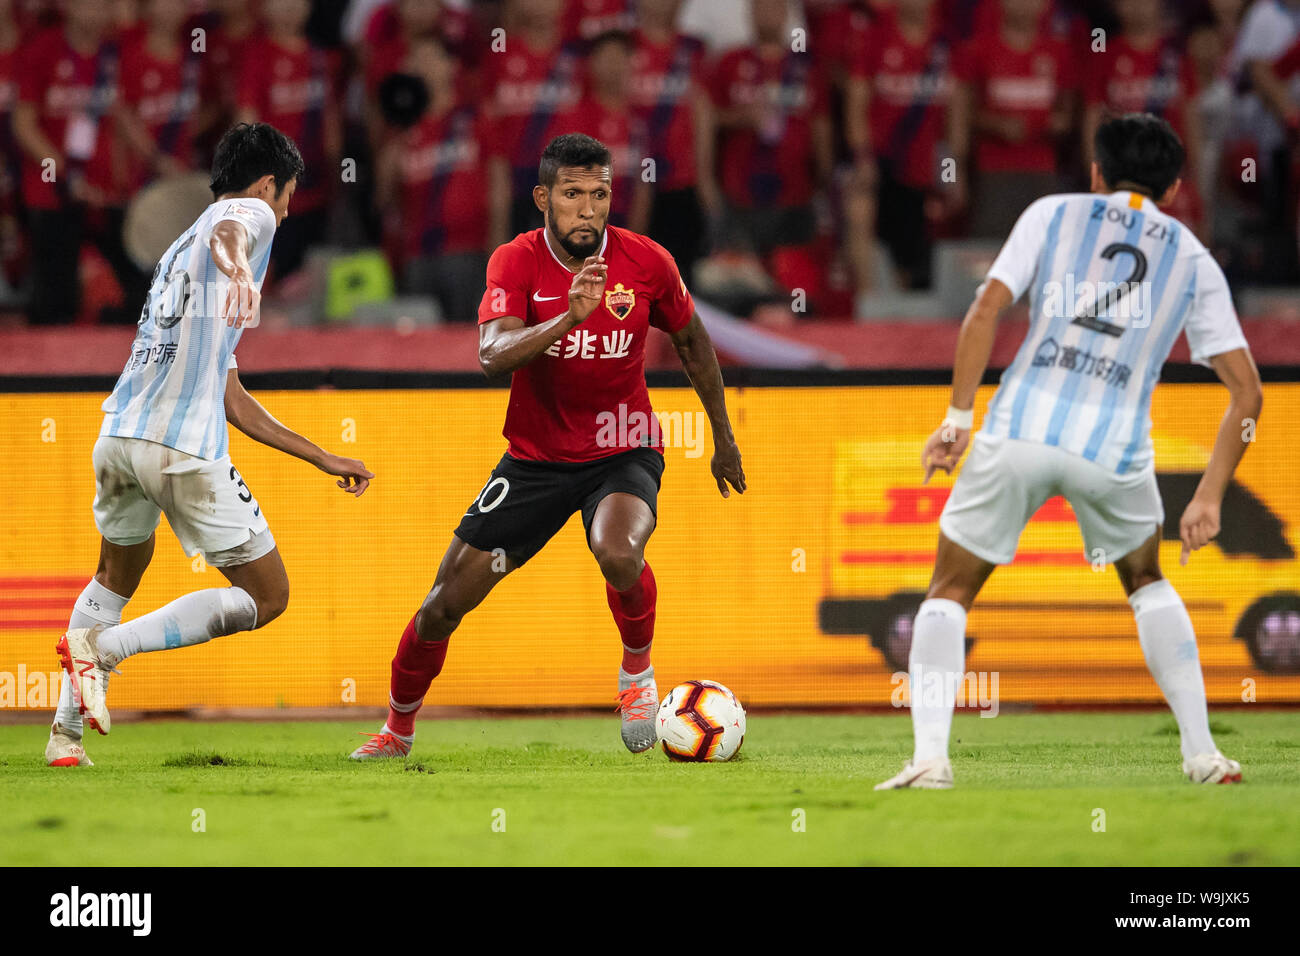 Brazilian-born Portuguese football player Dyego Sousa of Shenzhen F.C., middle, chases after the ball in the 22nd round match during the 2019 Chinese Football Association Super League (CSL) in Shenzhen city, Guandong province, China, 14 August 2019. Stock Photo